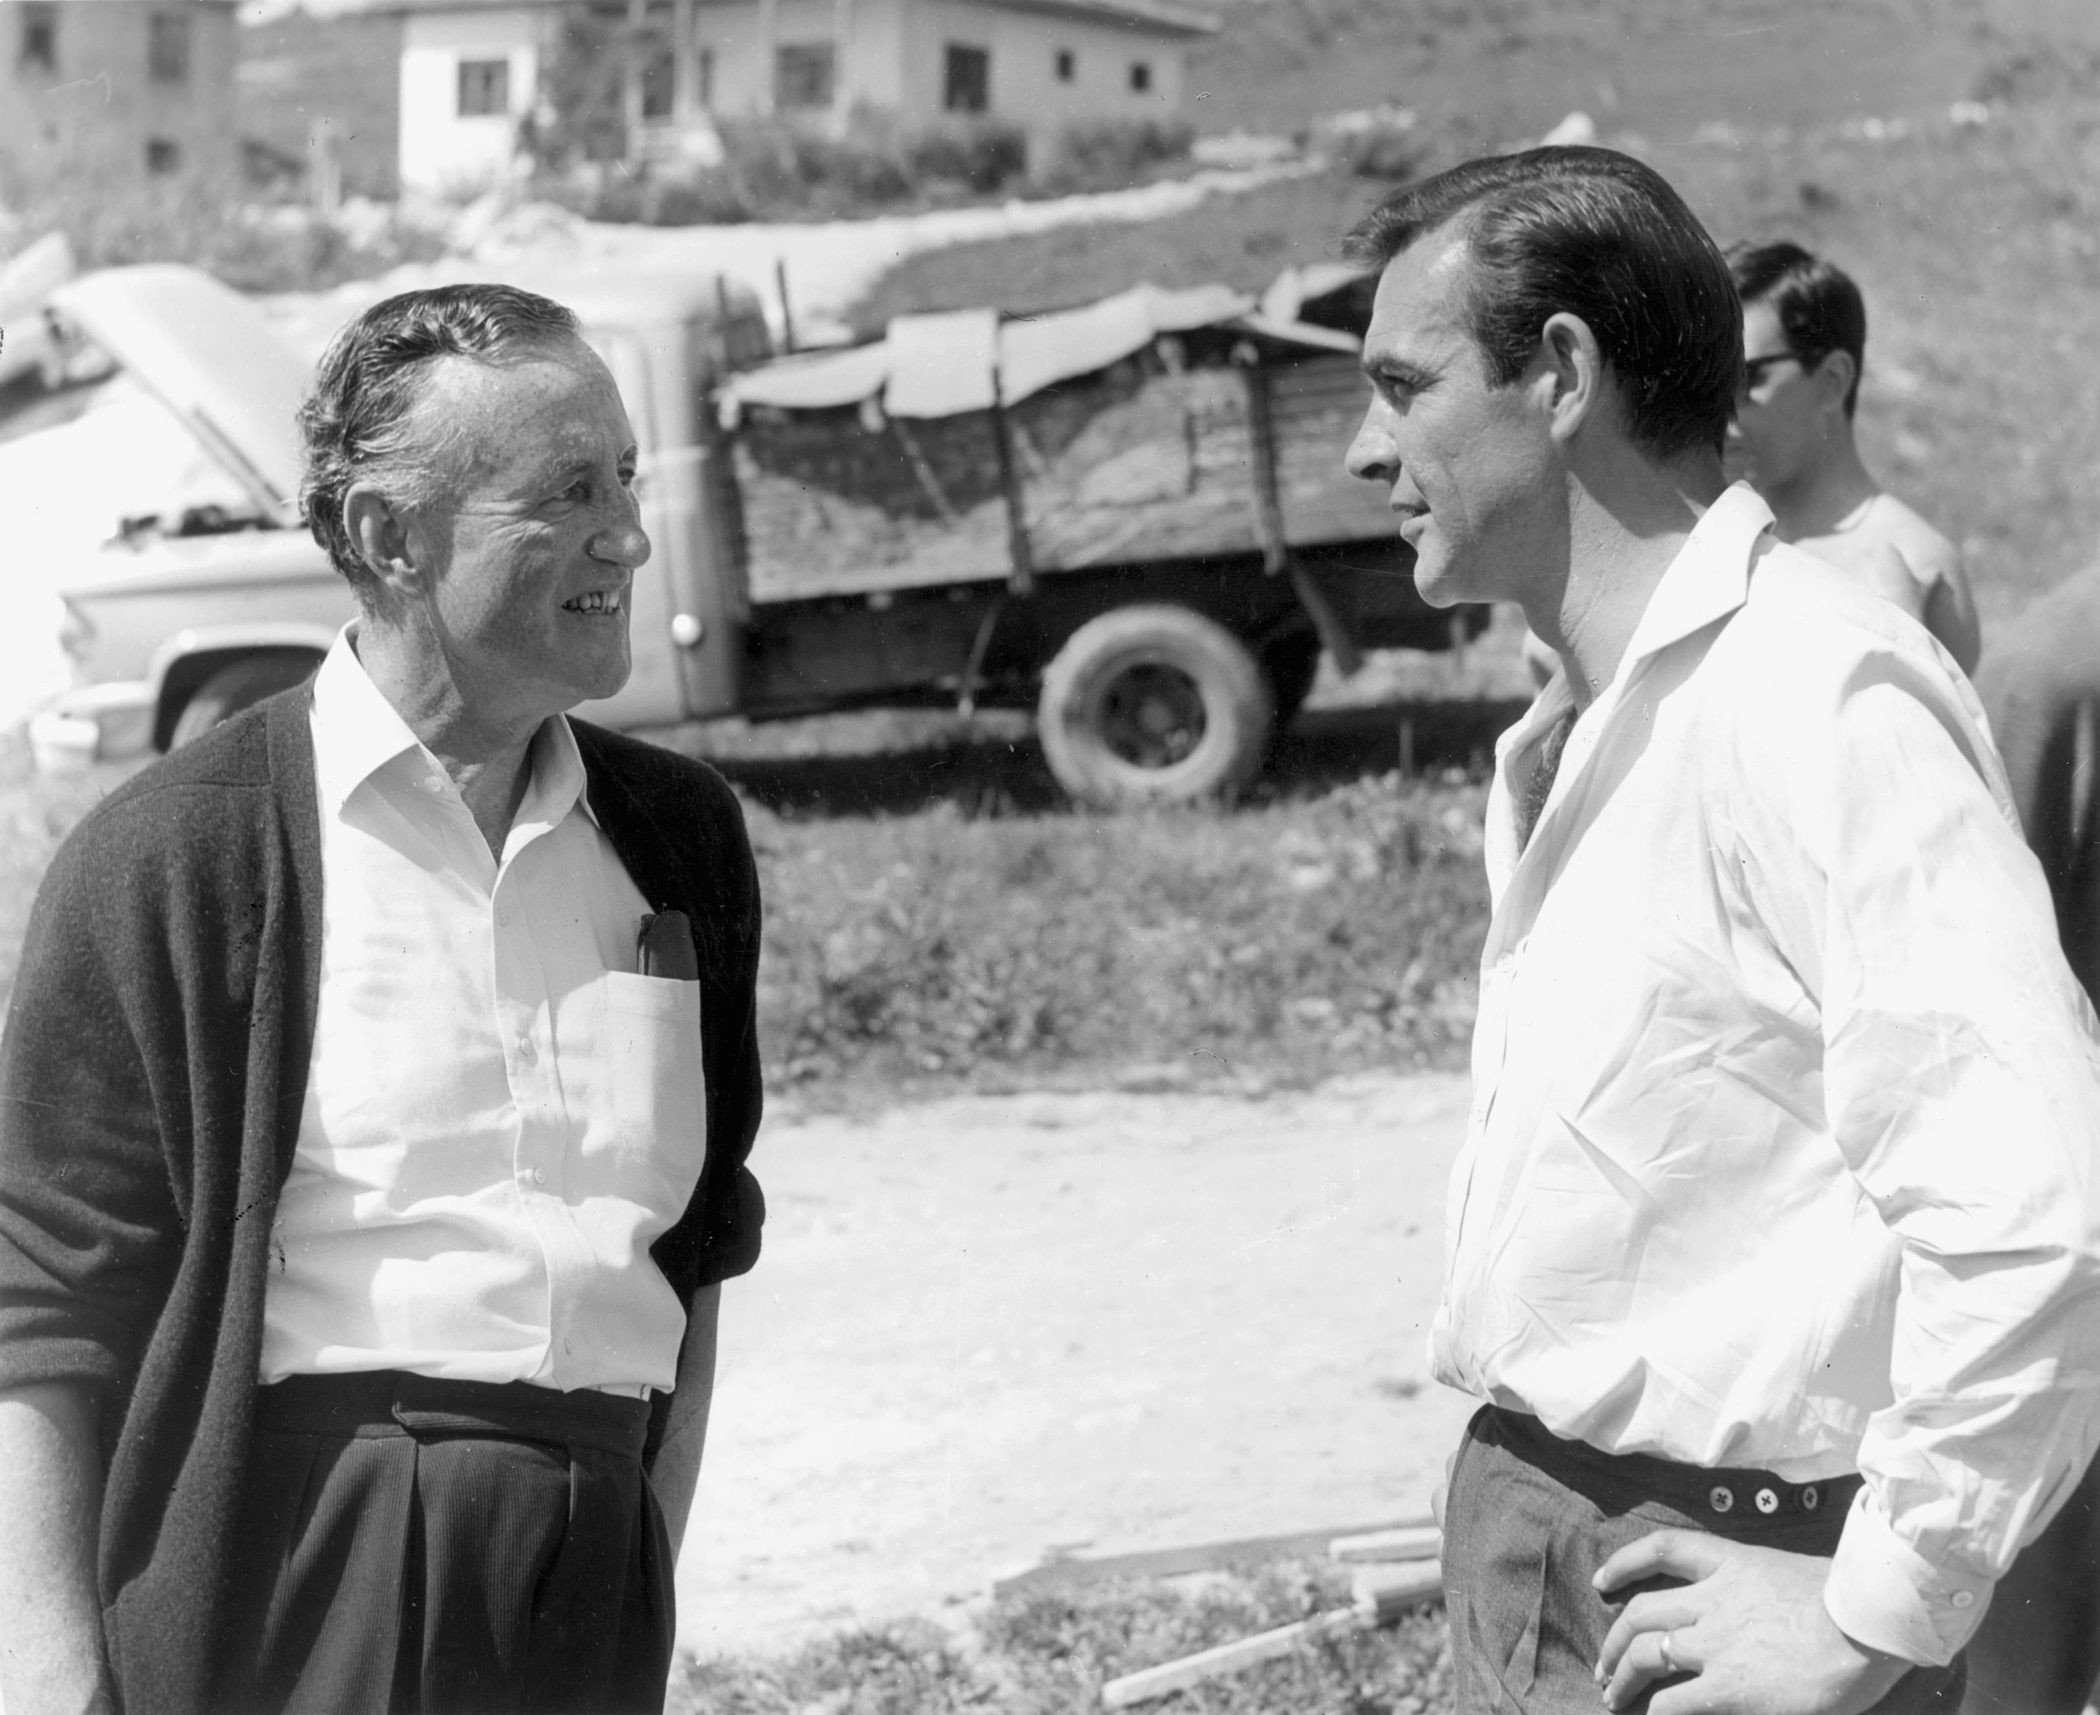 During the filming of the movie From Russia With Love, James Bond creator Ian Fleming visits with Sean Connery, who played the super spy in a series of motion  pictures based on Fleming’s books.